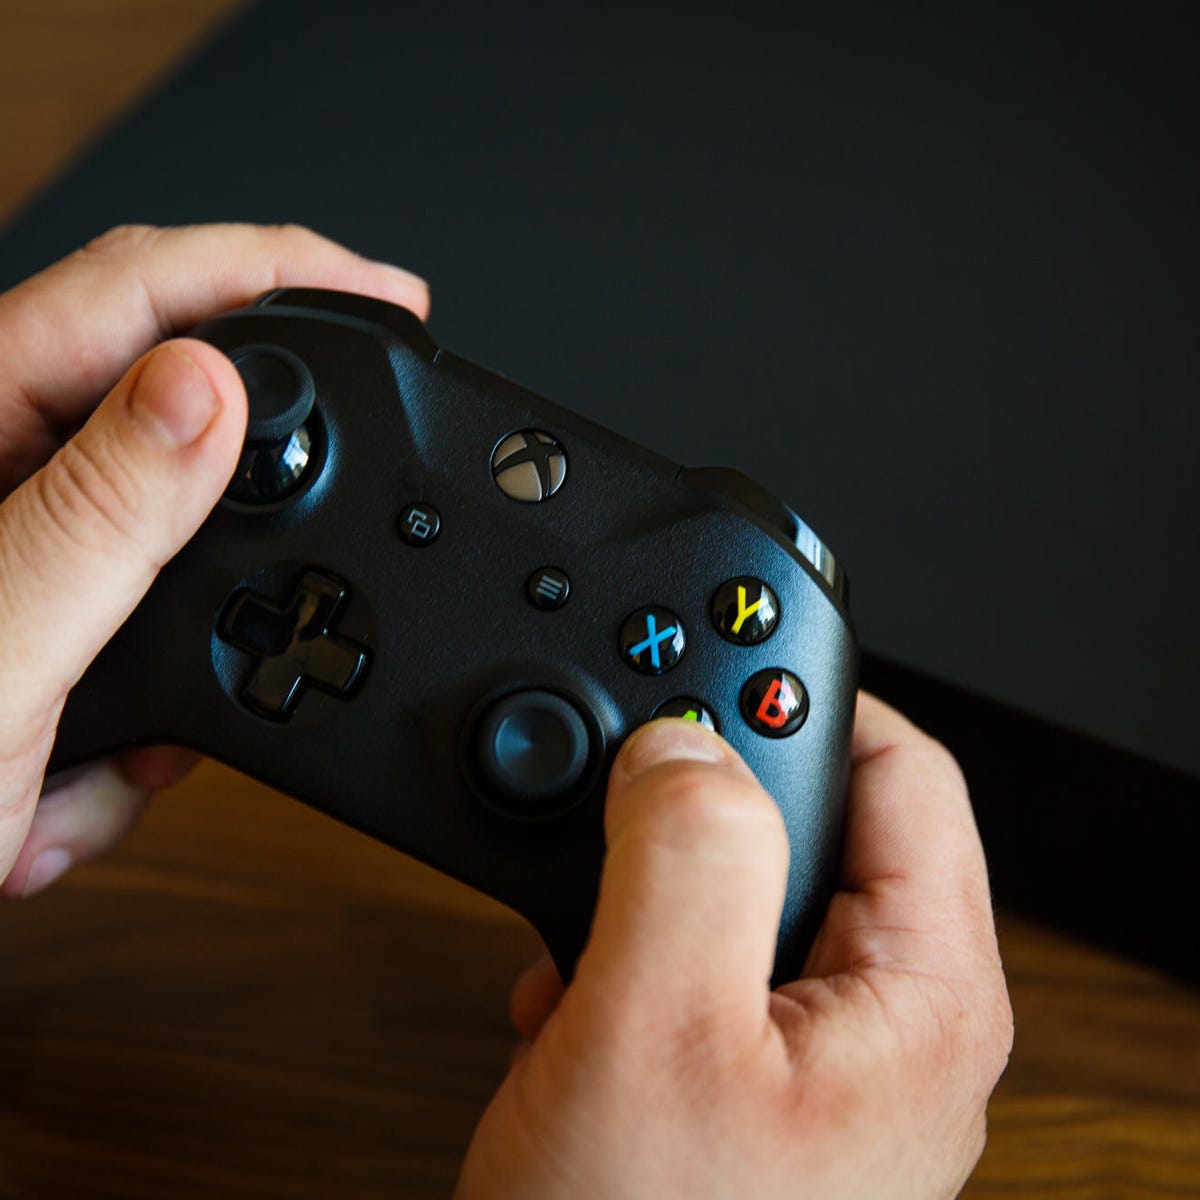 dek alledaags Symposium Microsoft Xbox One X review: It's the most powerful console you can buy.  But is that enough? - CNET